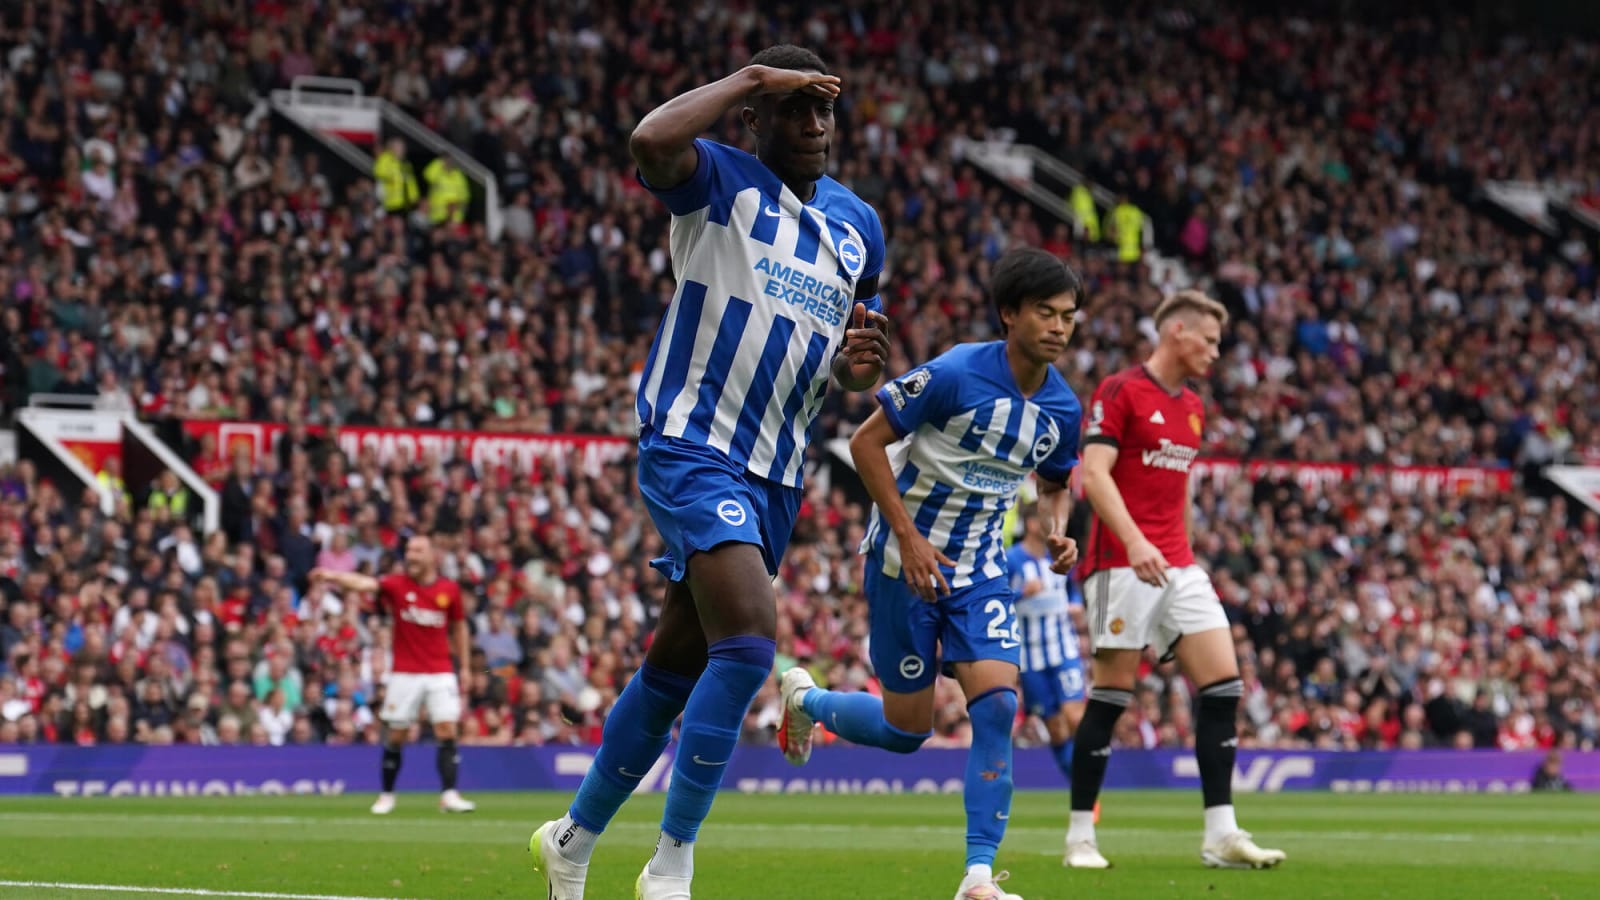 Watch: Former Man United ace Danny Welbeck given freedom of Old Trafford to give Brighton the lead